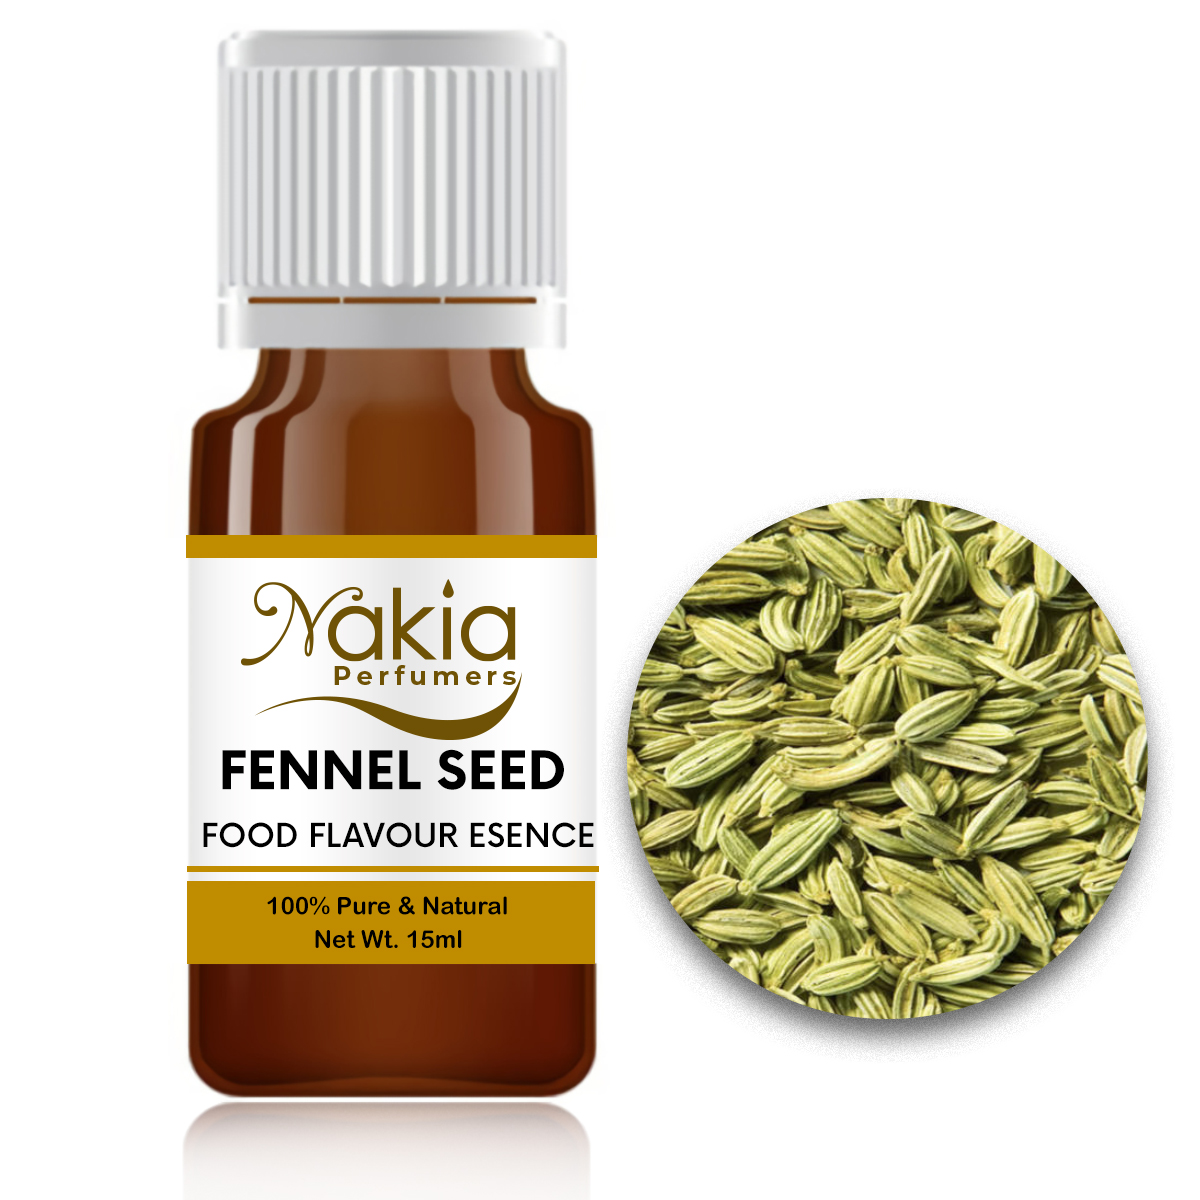 FENNEL SEED FLAVOURING ESSENCE